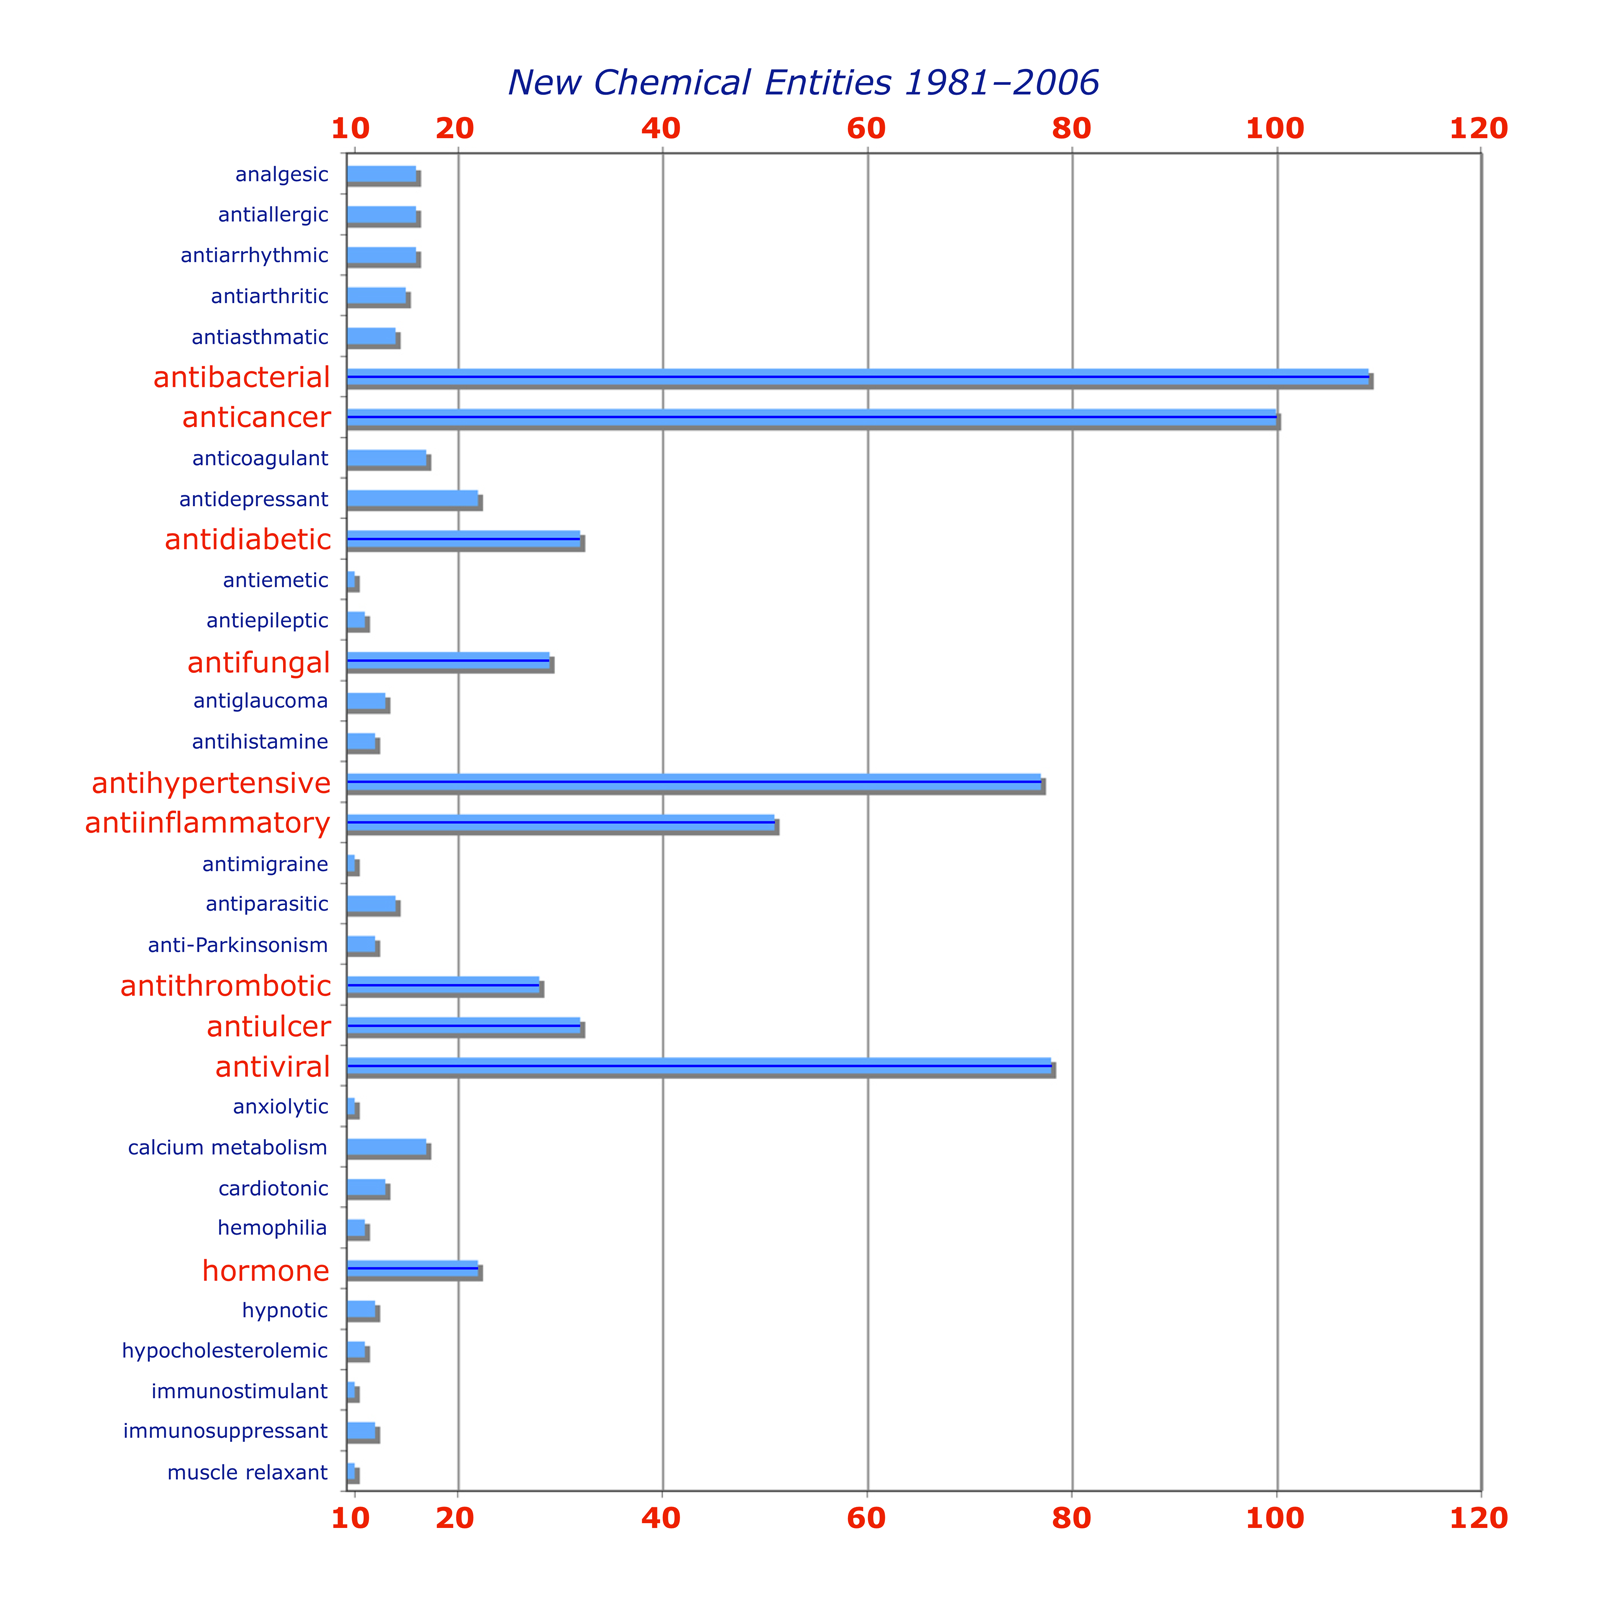 Table showing the target diseases of new drugs during 1981-2006